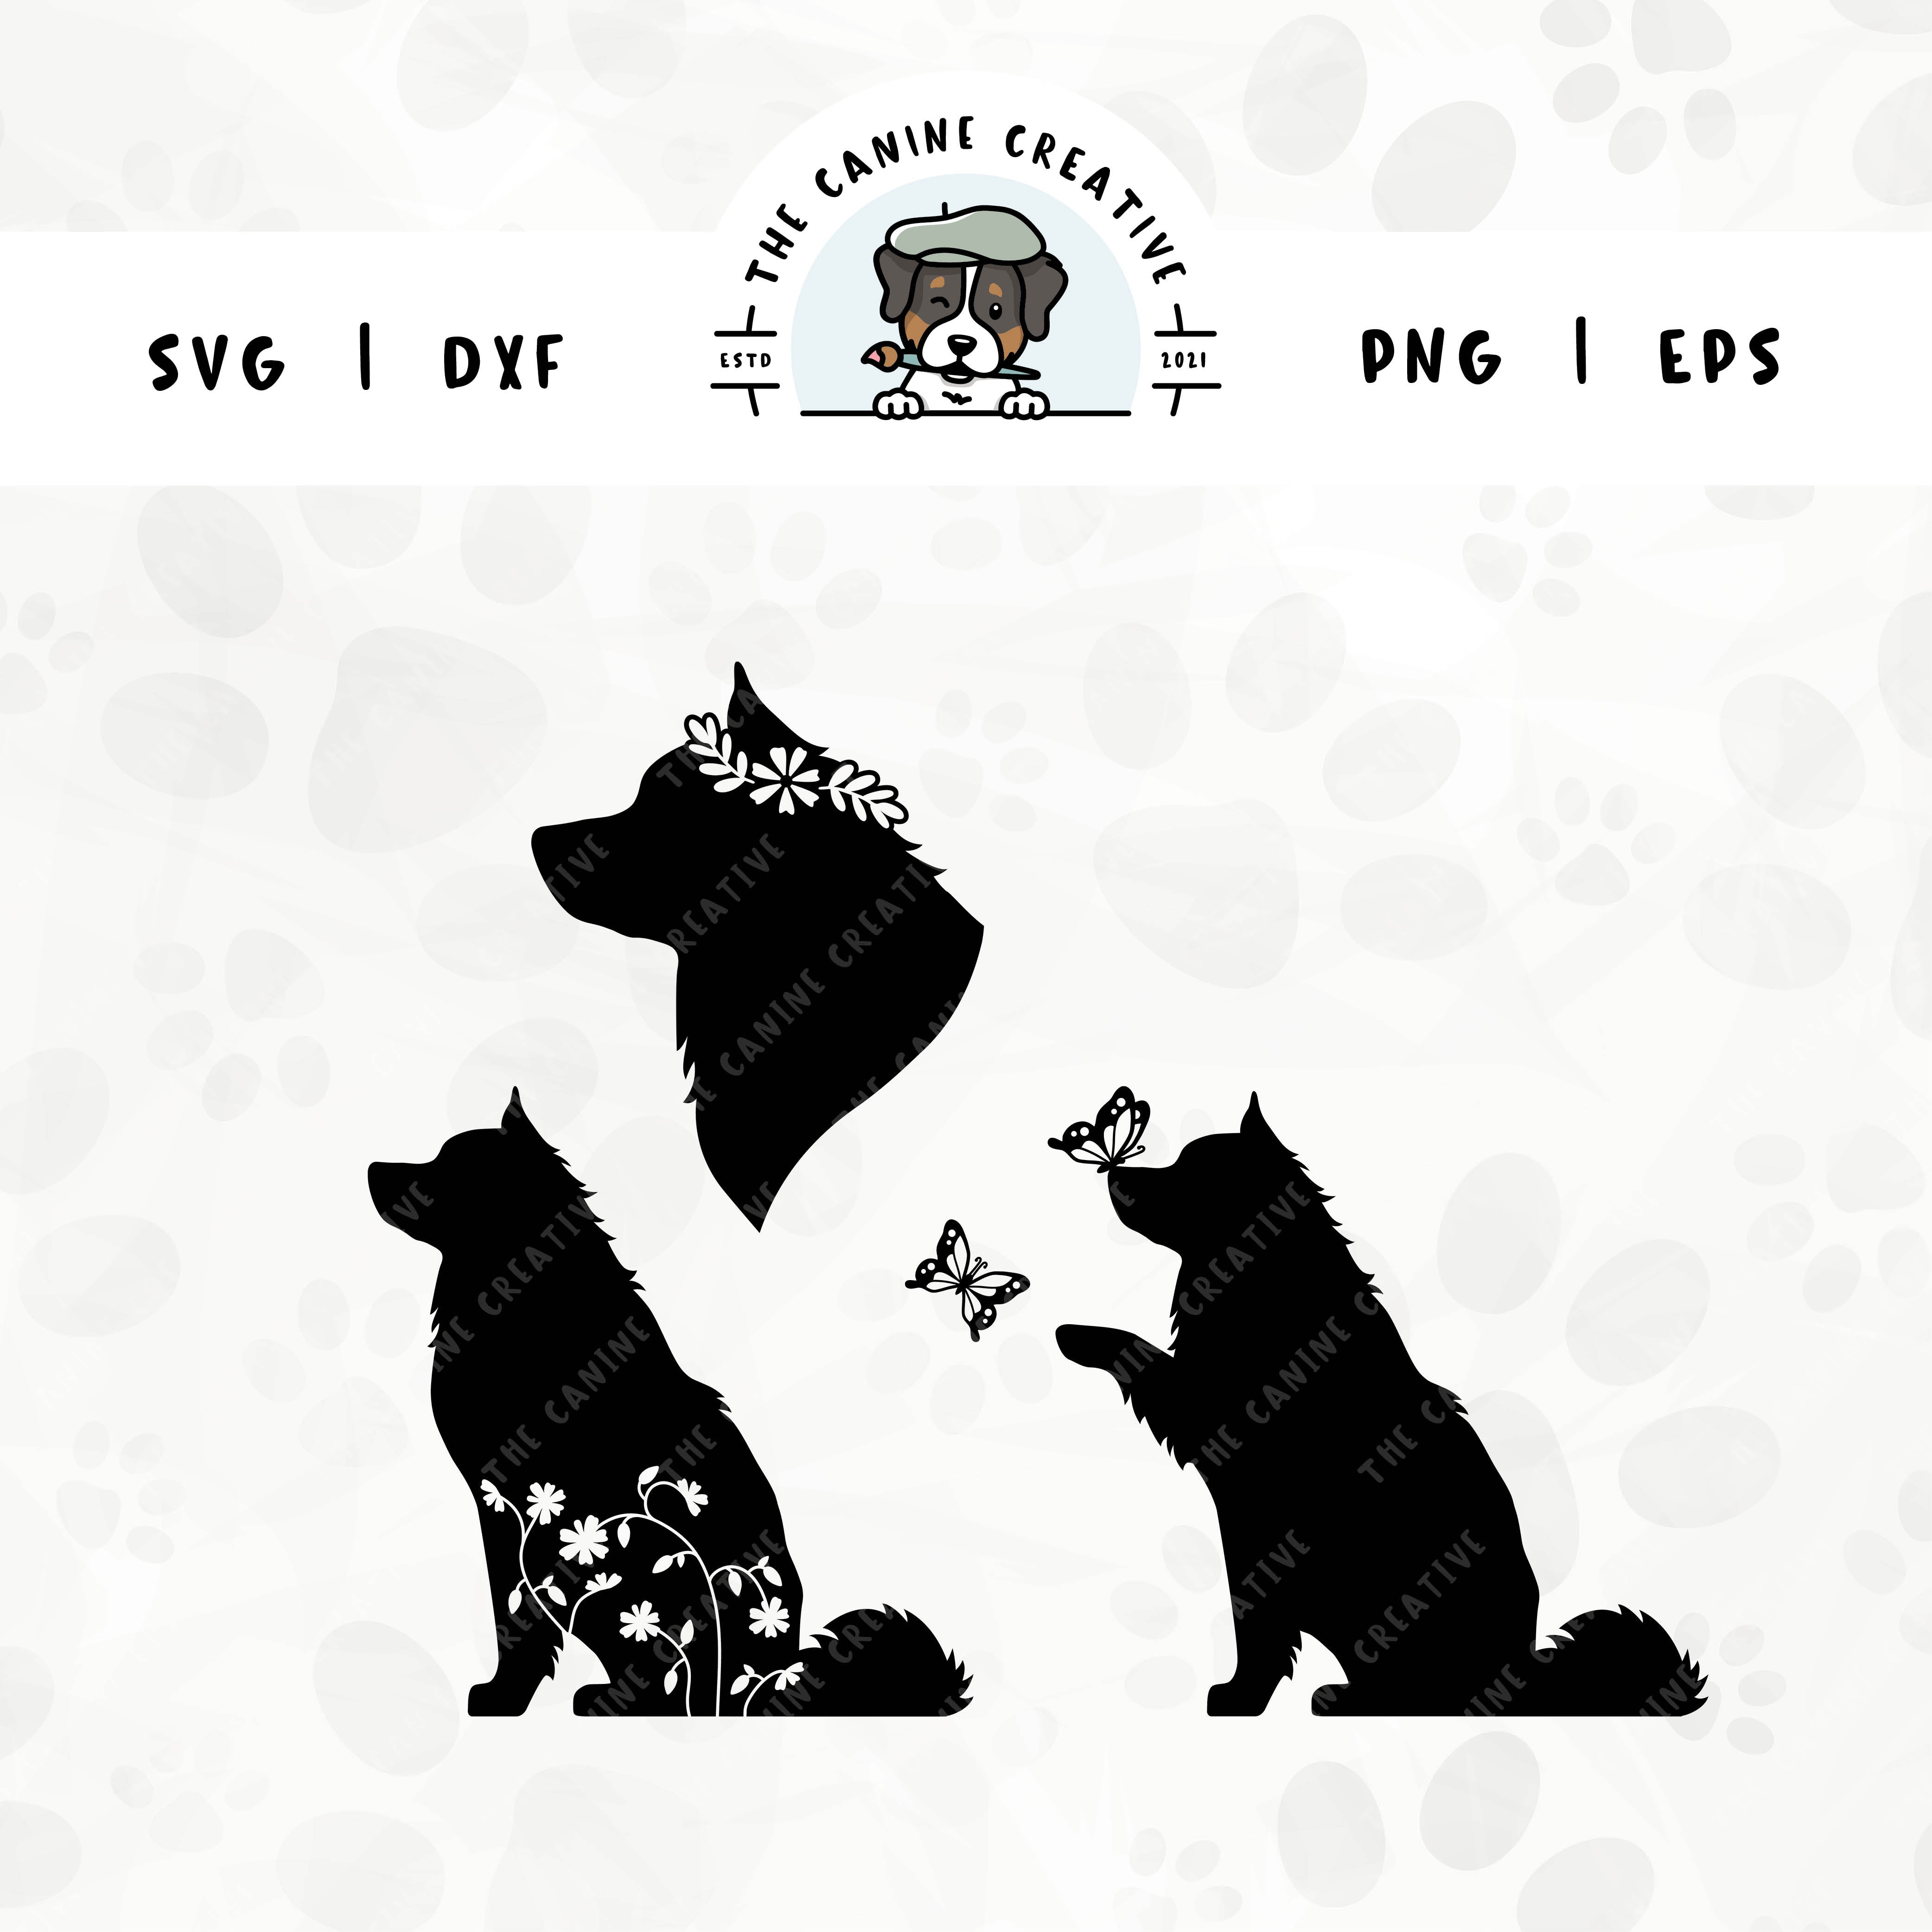 This 3-pack Alaskan Malamute silhouette bundle features a head portrait of a dog wearing a floral crown, a sitting dog with inset flowers, and a dog interacting with butterflies. File formats include: SVG, DXF, PNG, and EPS.